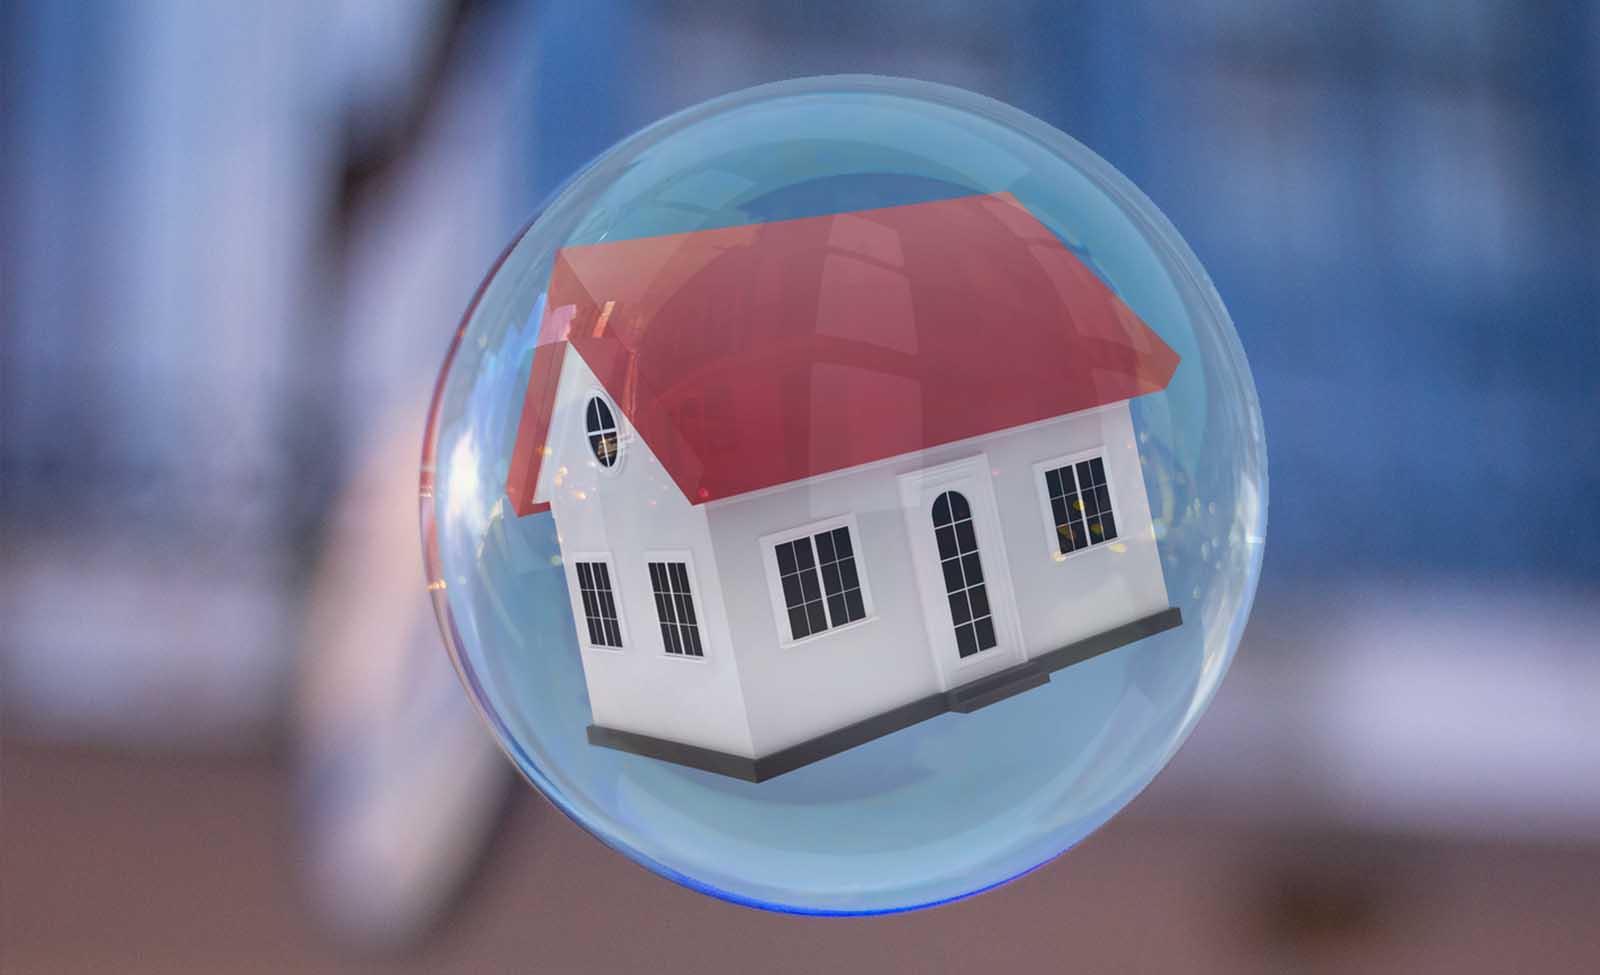 Housing Bubble - Not the kind you're thinking of